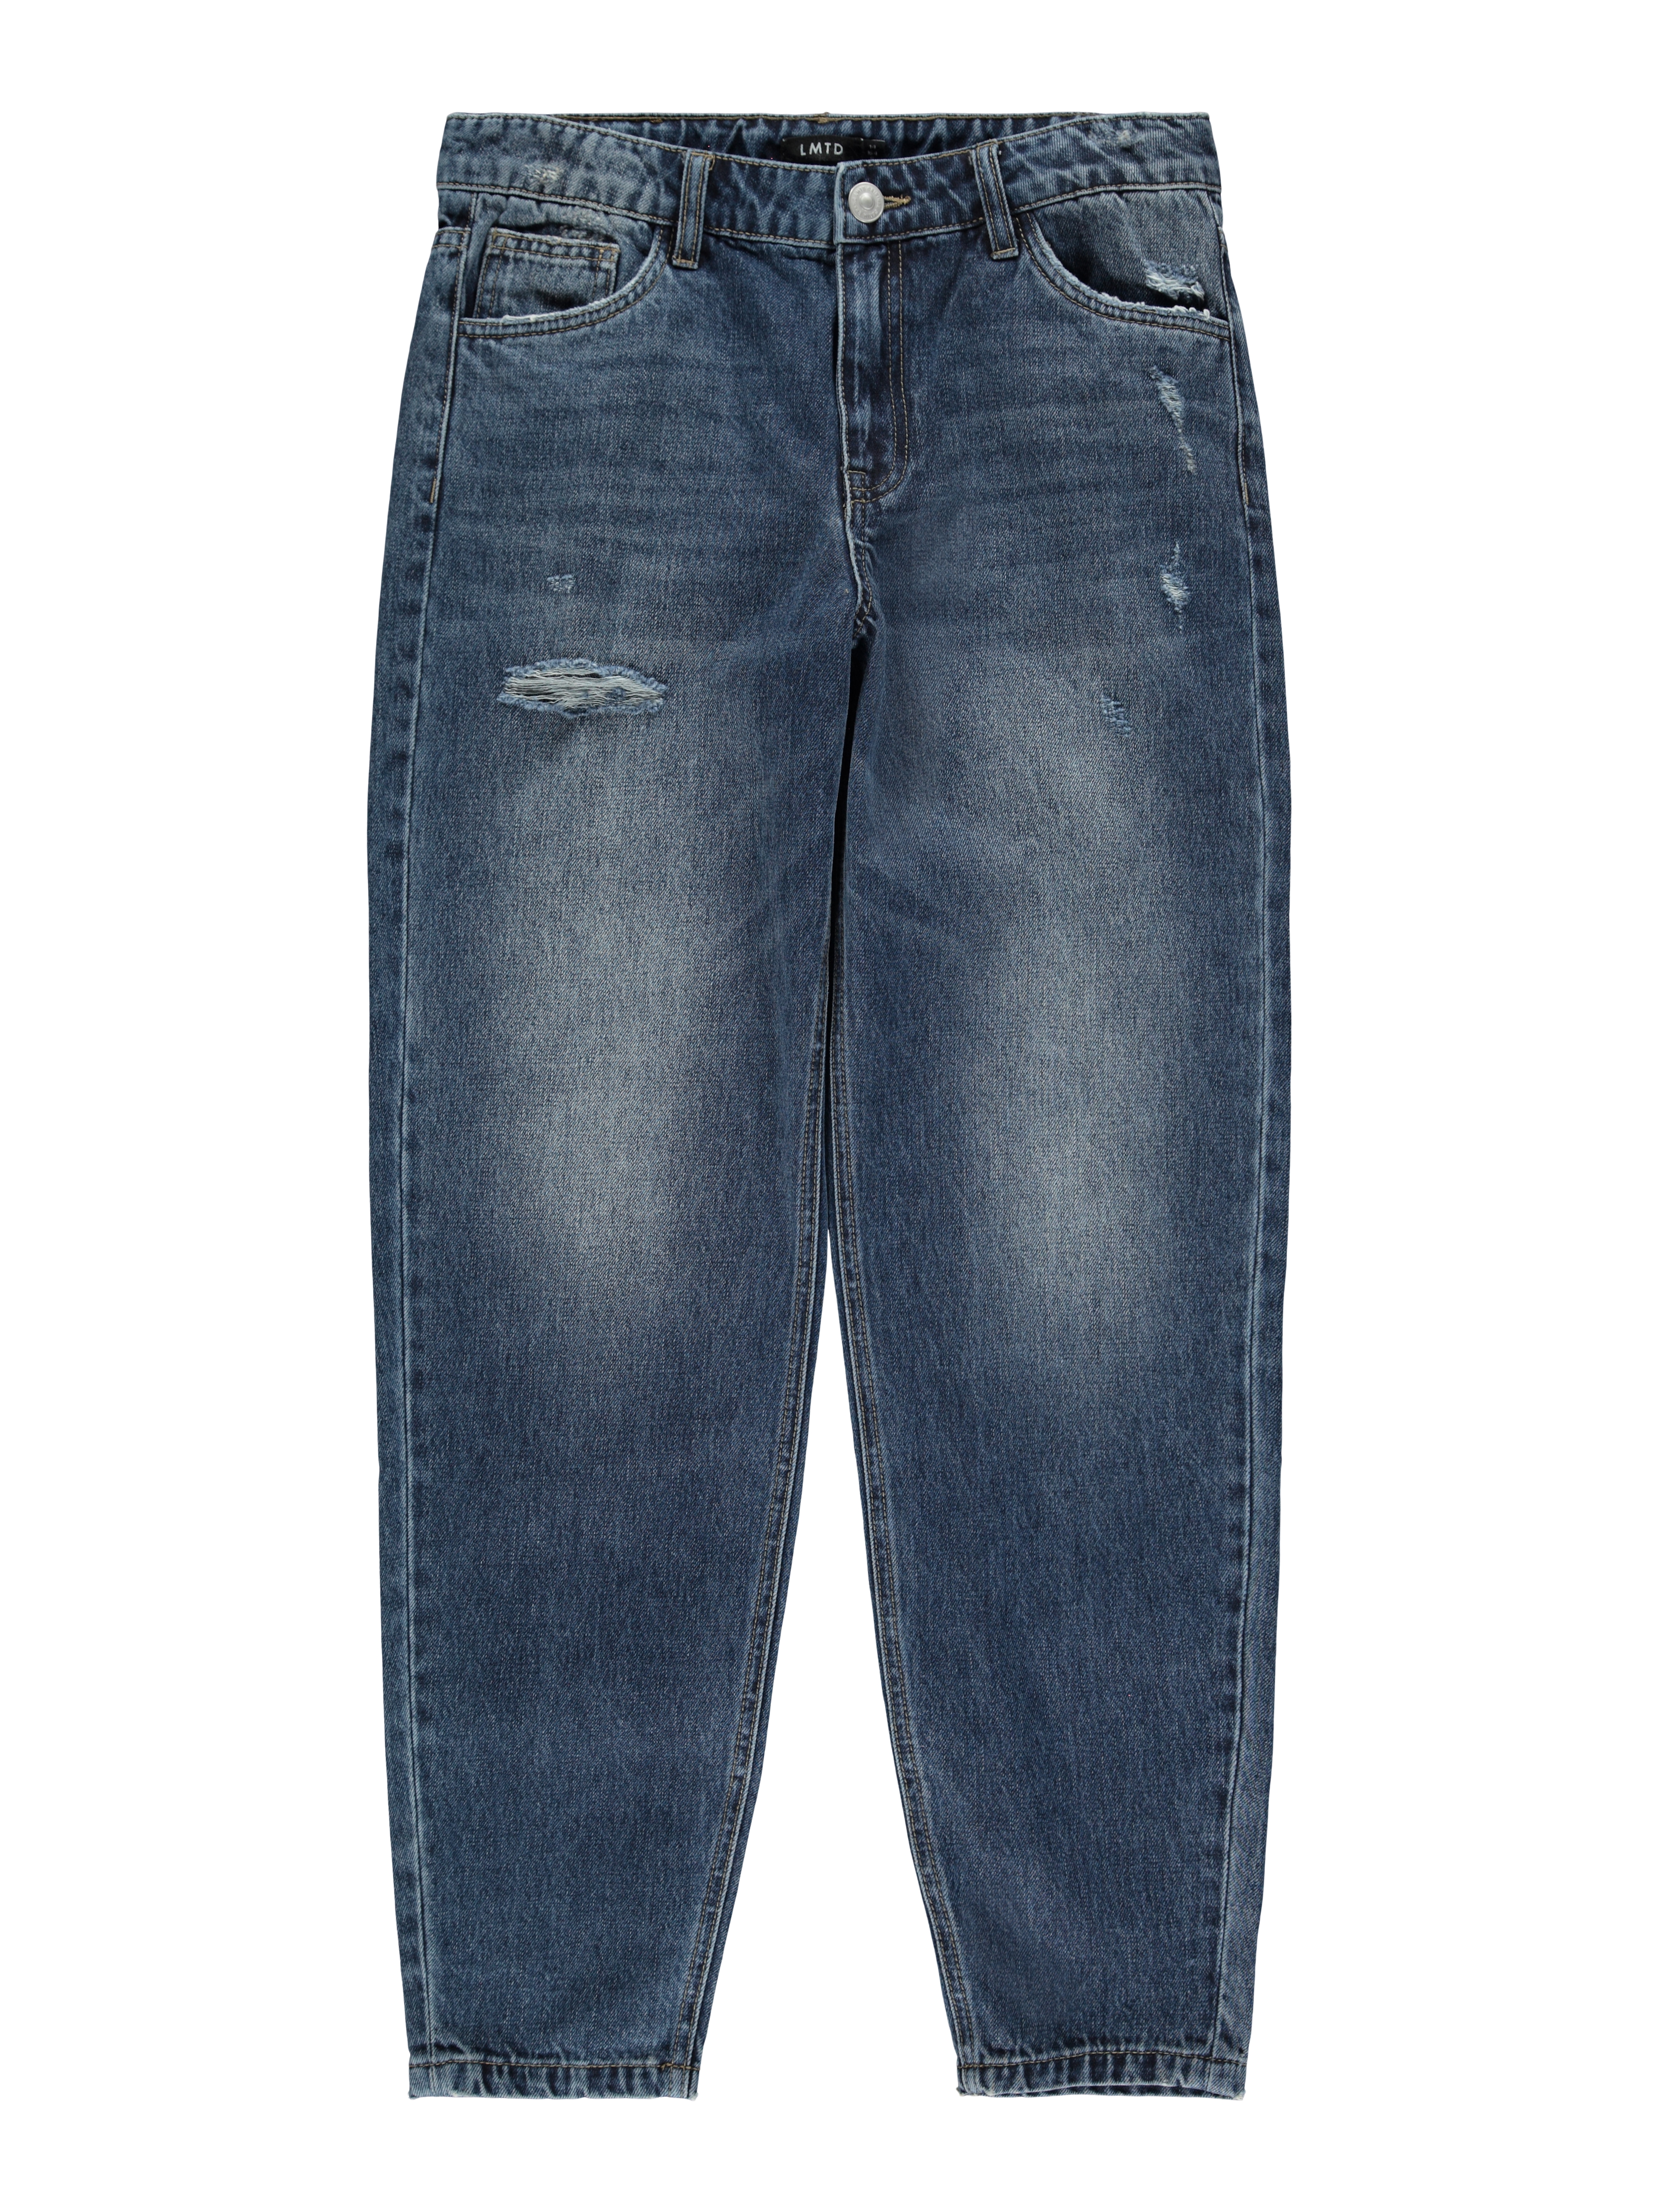 cnGsd Bambini LMTD Jeans Rimme in Blu 